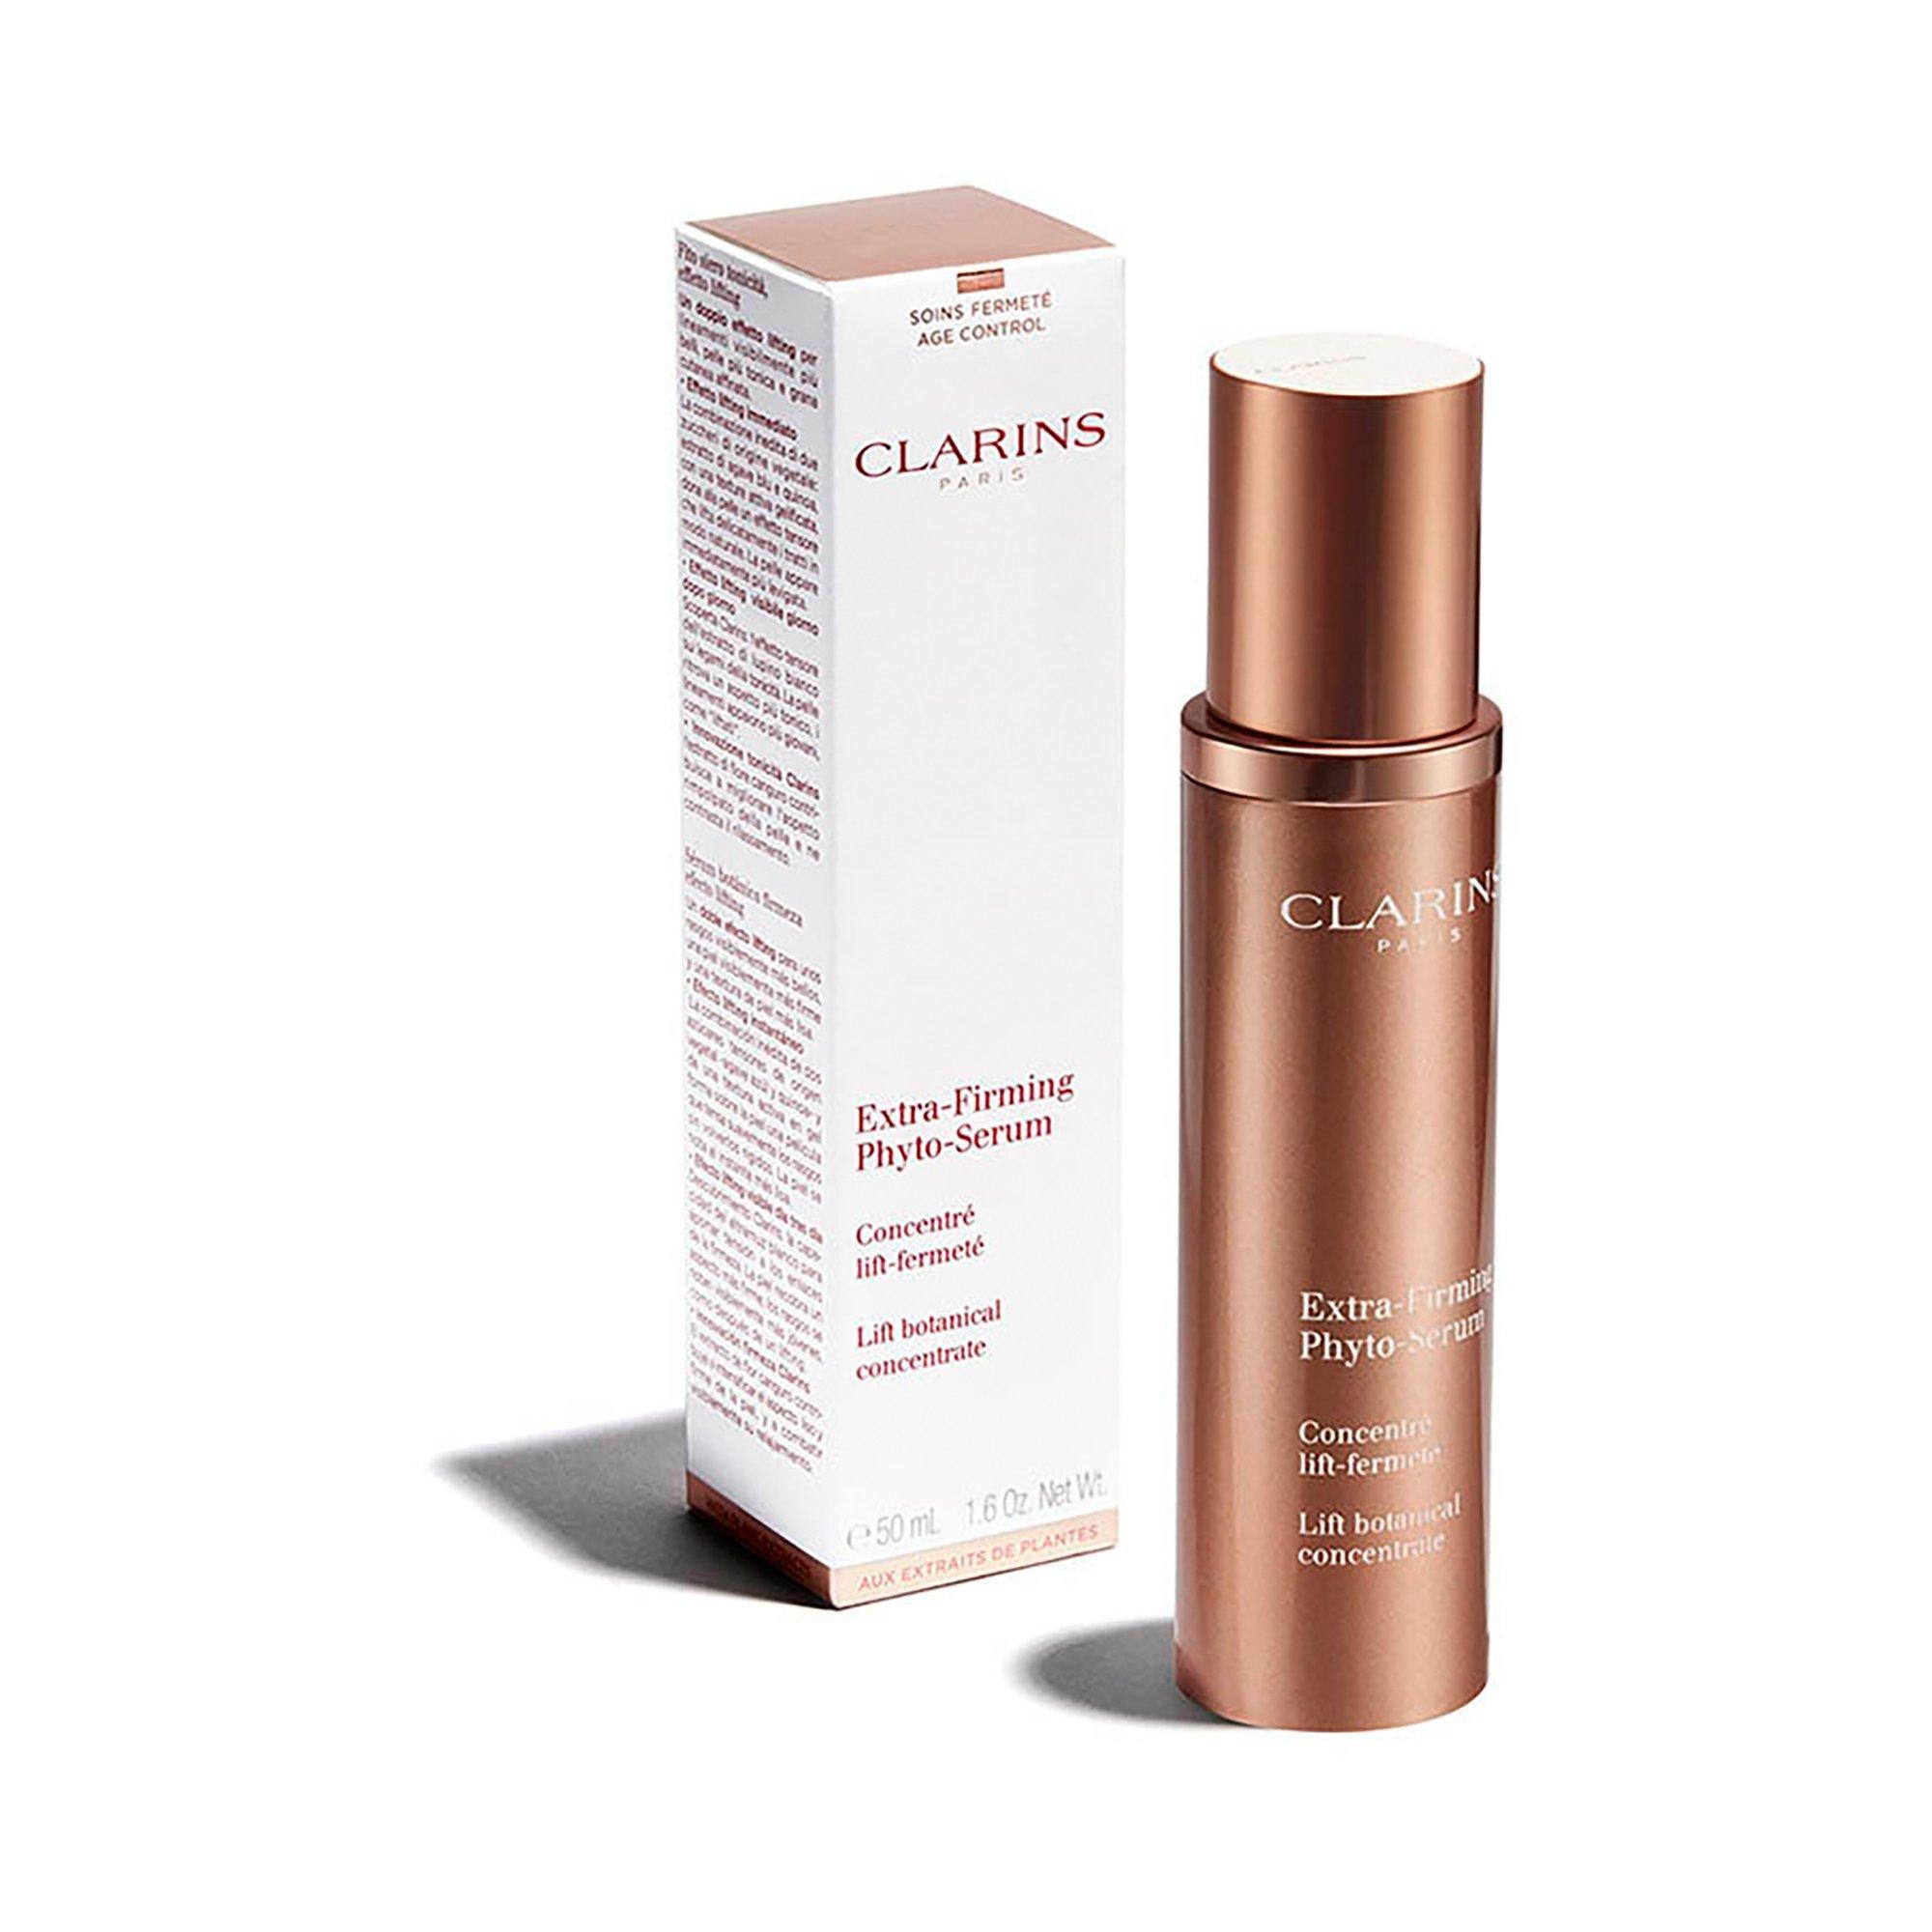 Image of CLARINS Extra-Firming Phyto-Serum - 50ml